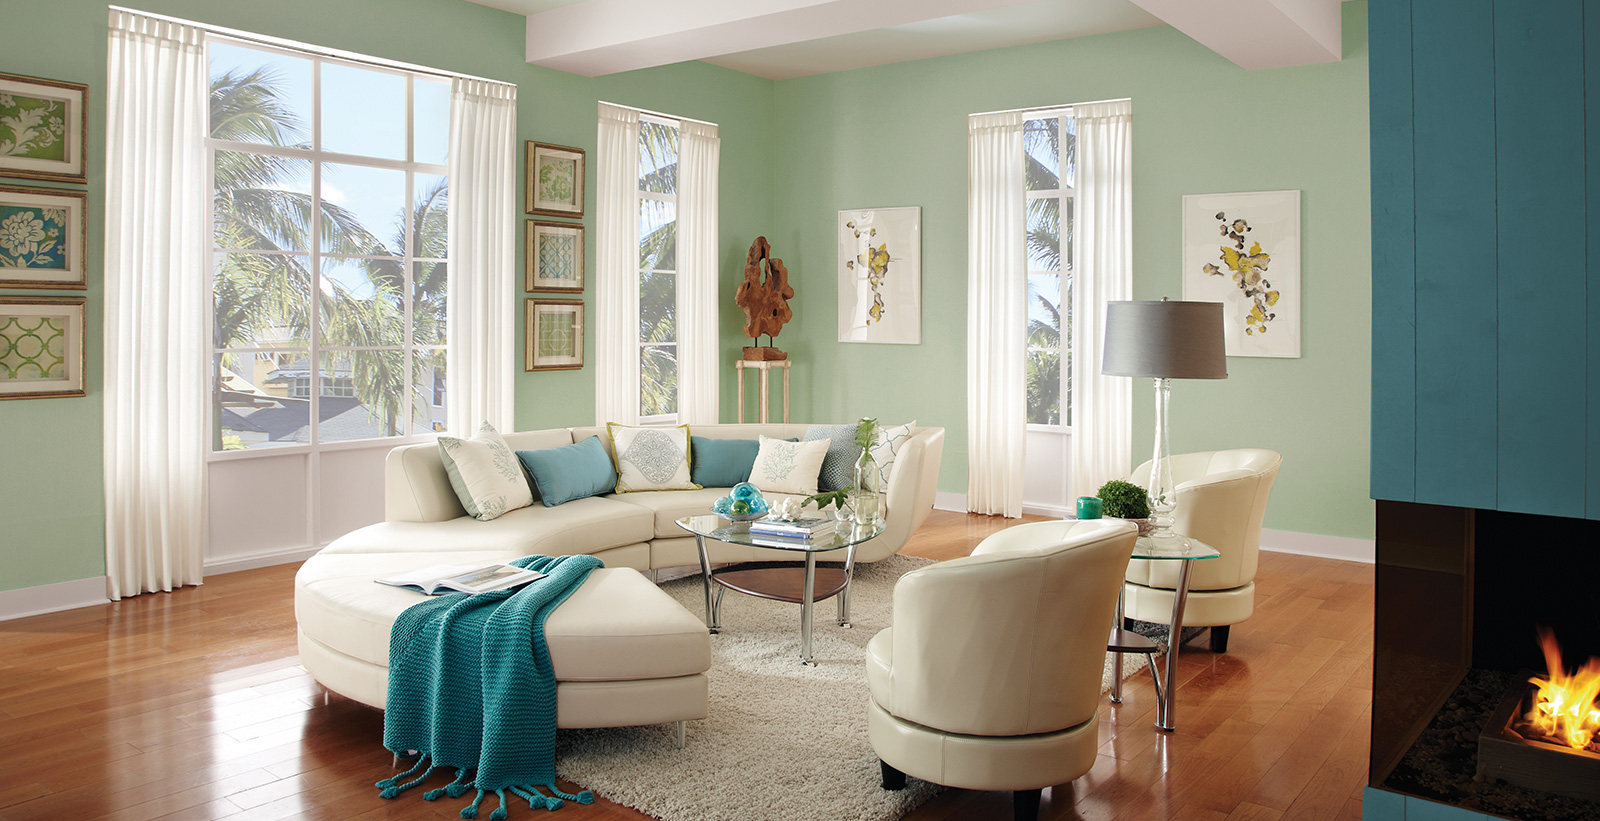 Coastal living room with pale green on main walls, teal on wall with fireplace, white on trim, and cream couch and chairs